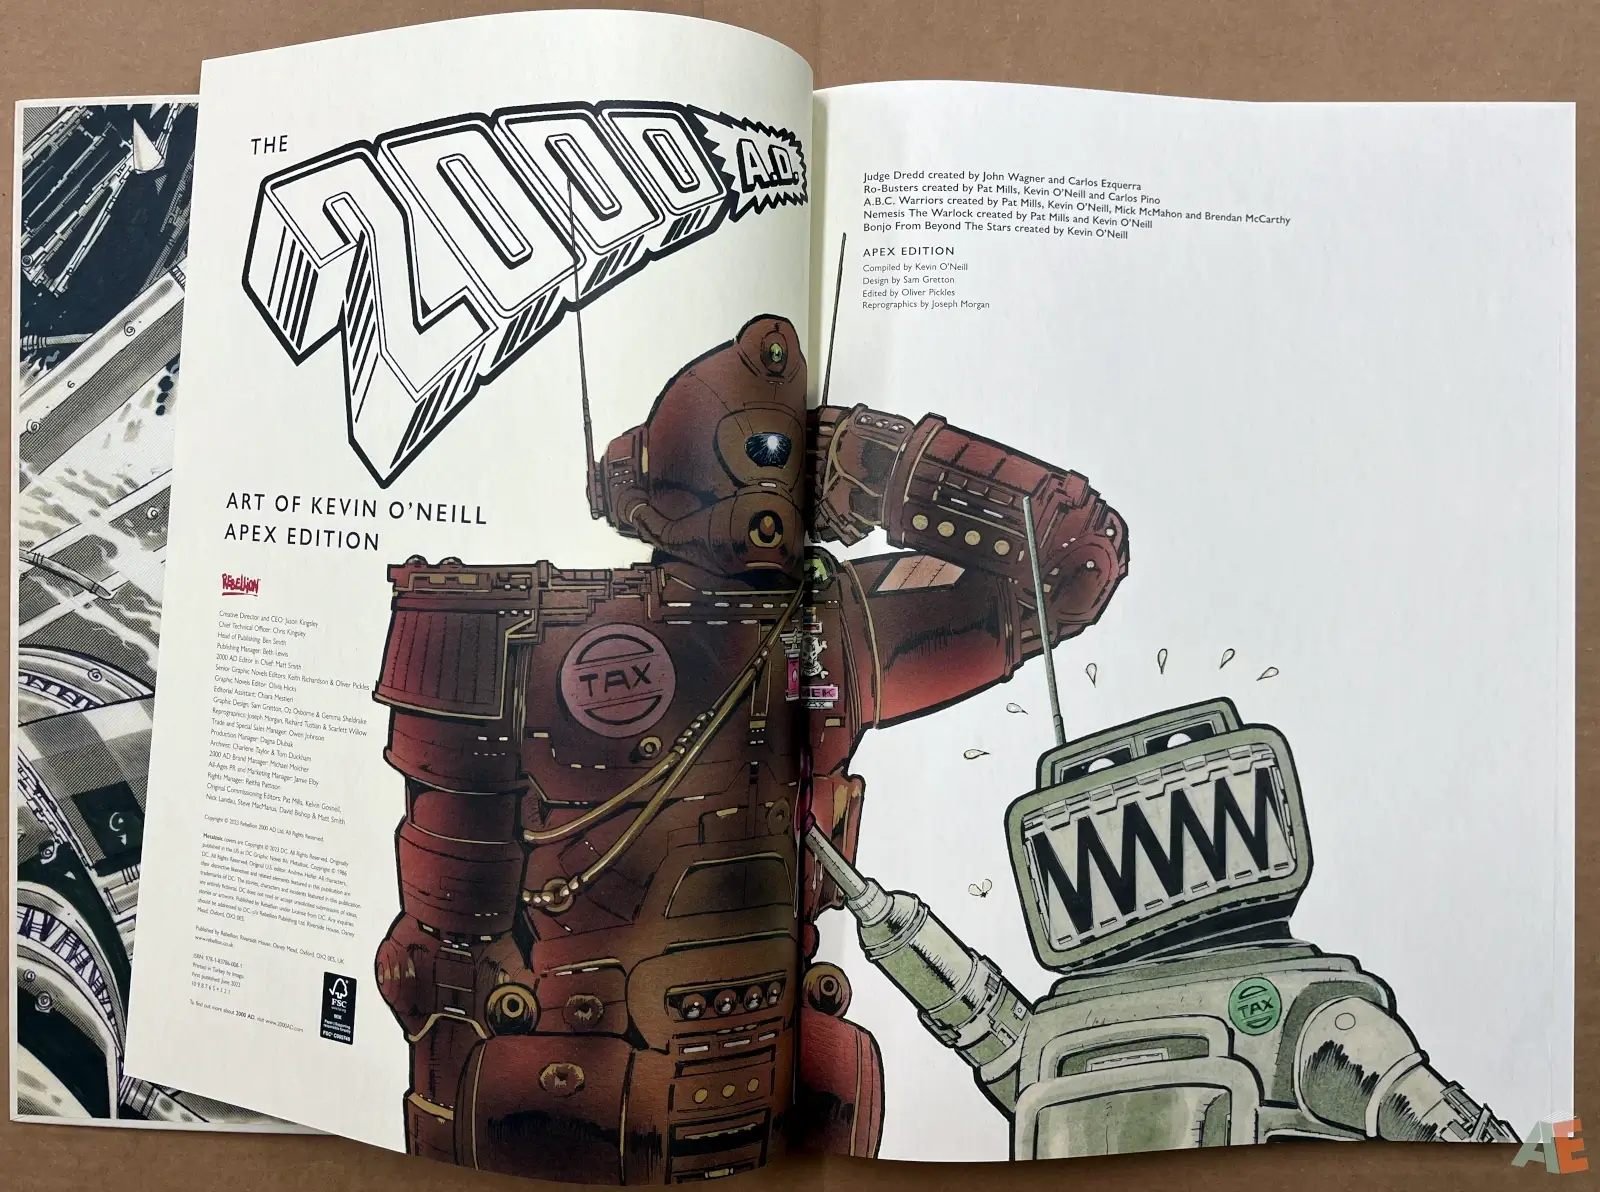 2000 AD Art of Kevin ONeill Apex Edition interior 1